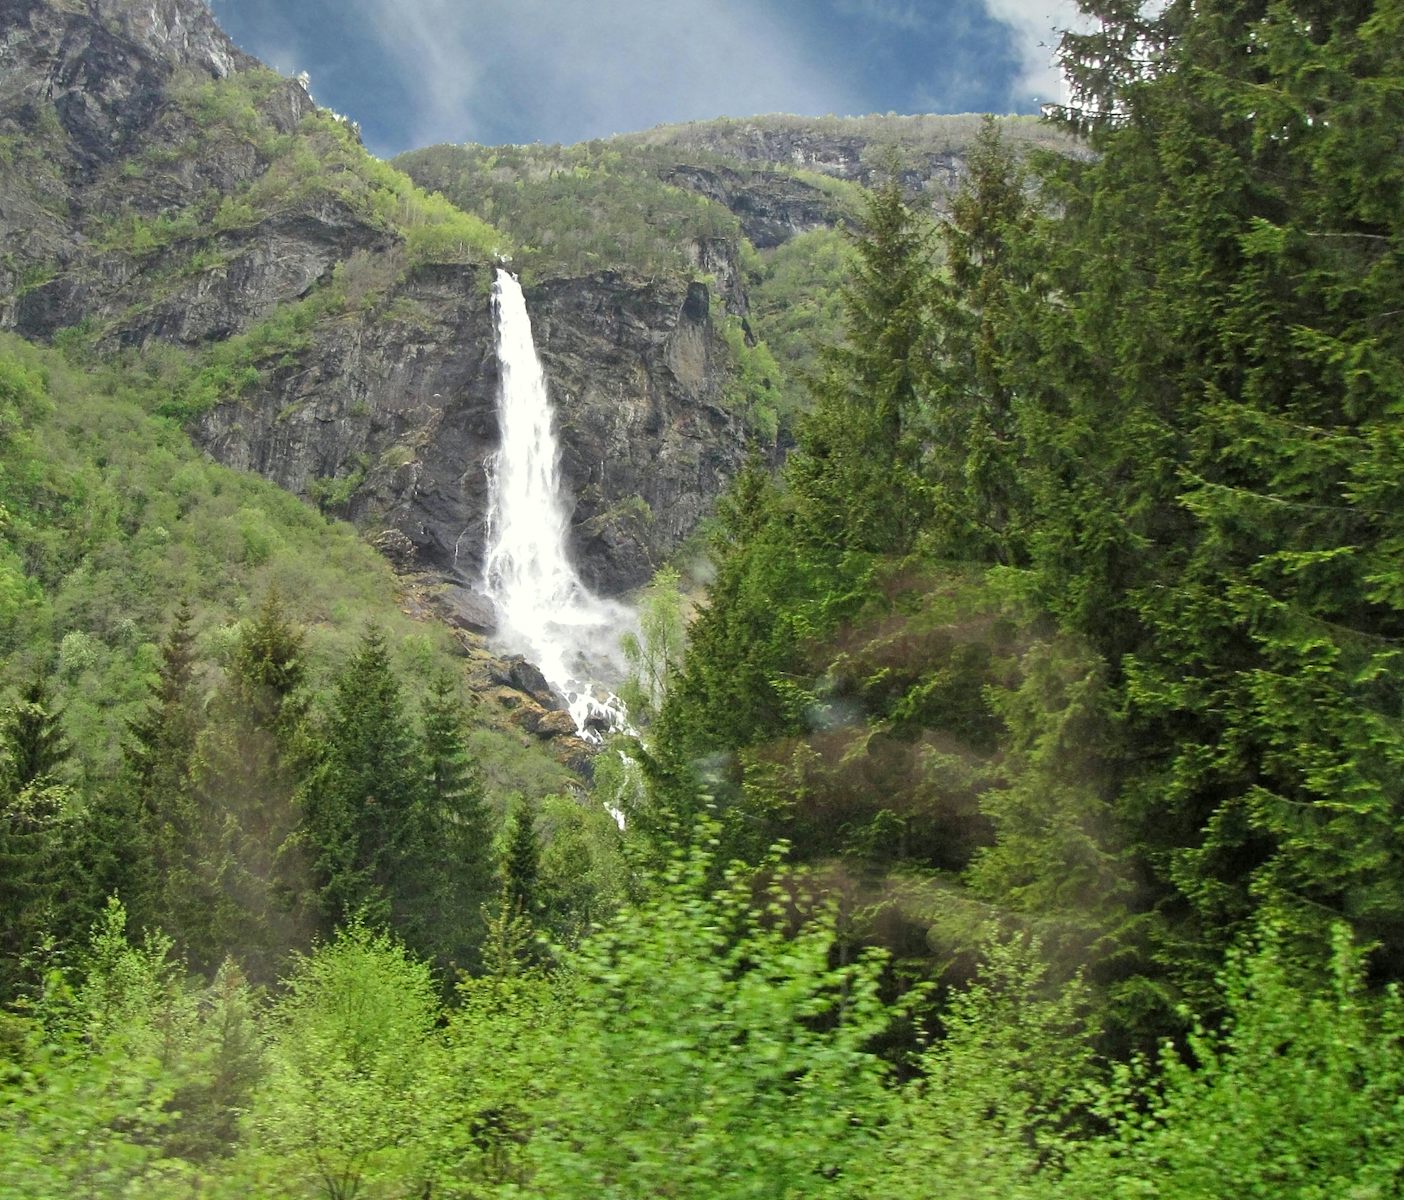 One of Norway's many beautiful waterfalls.